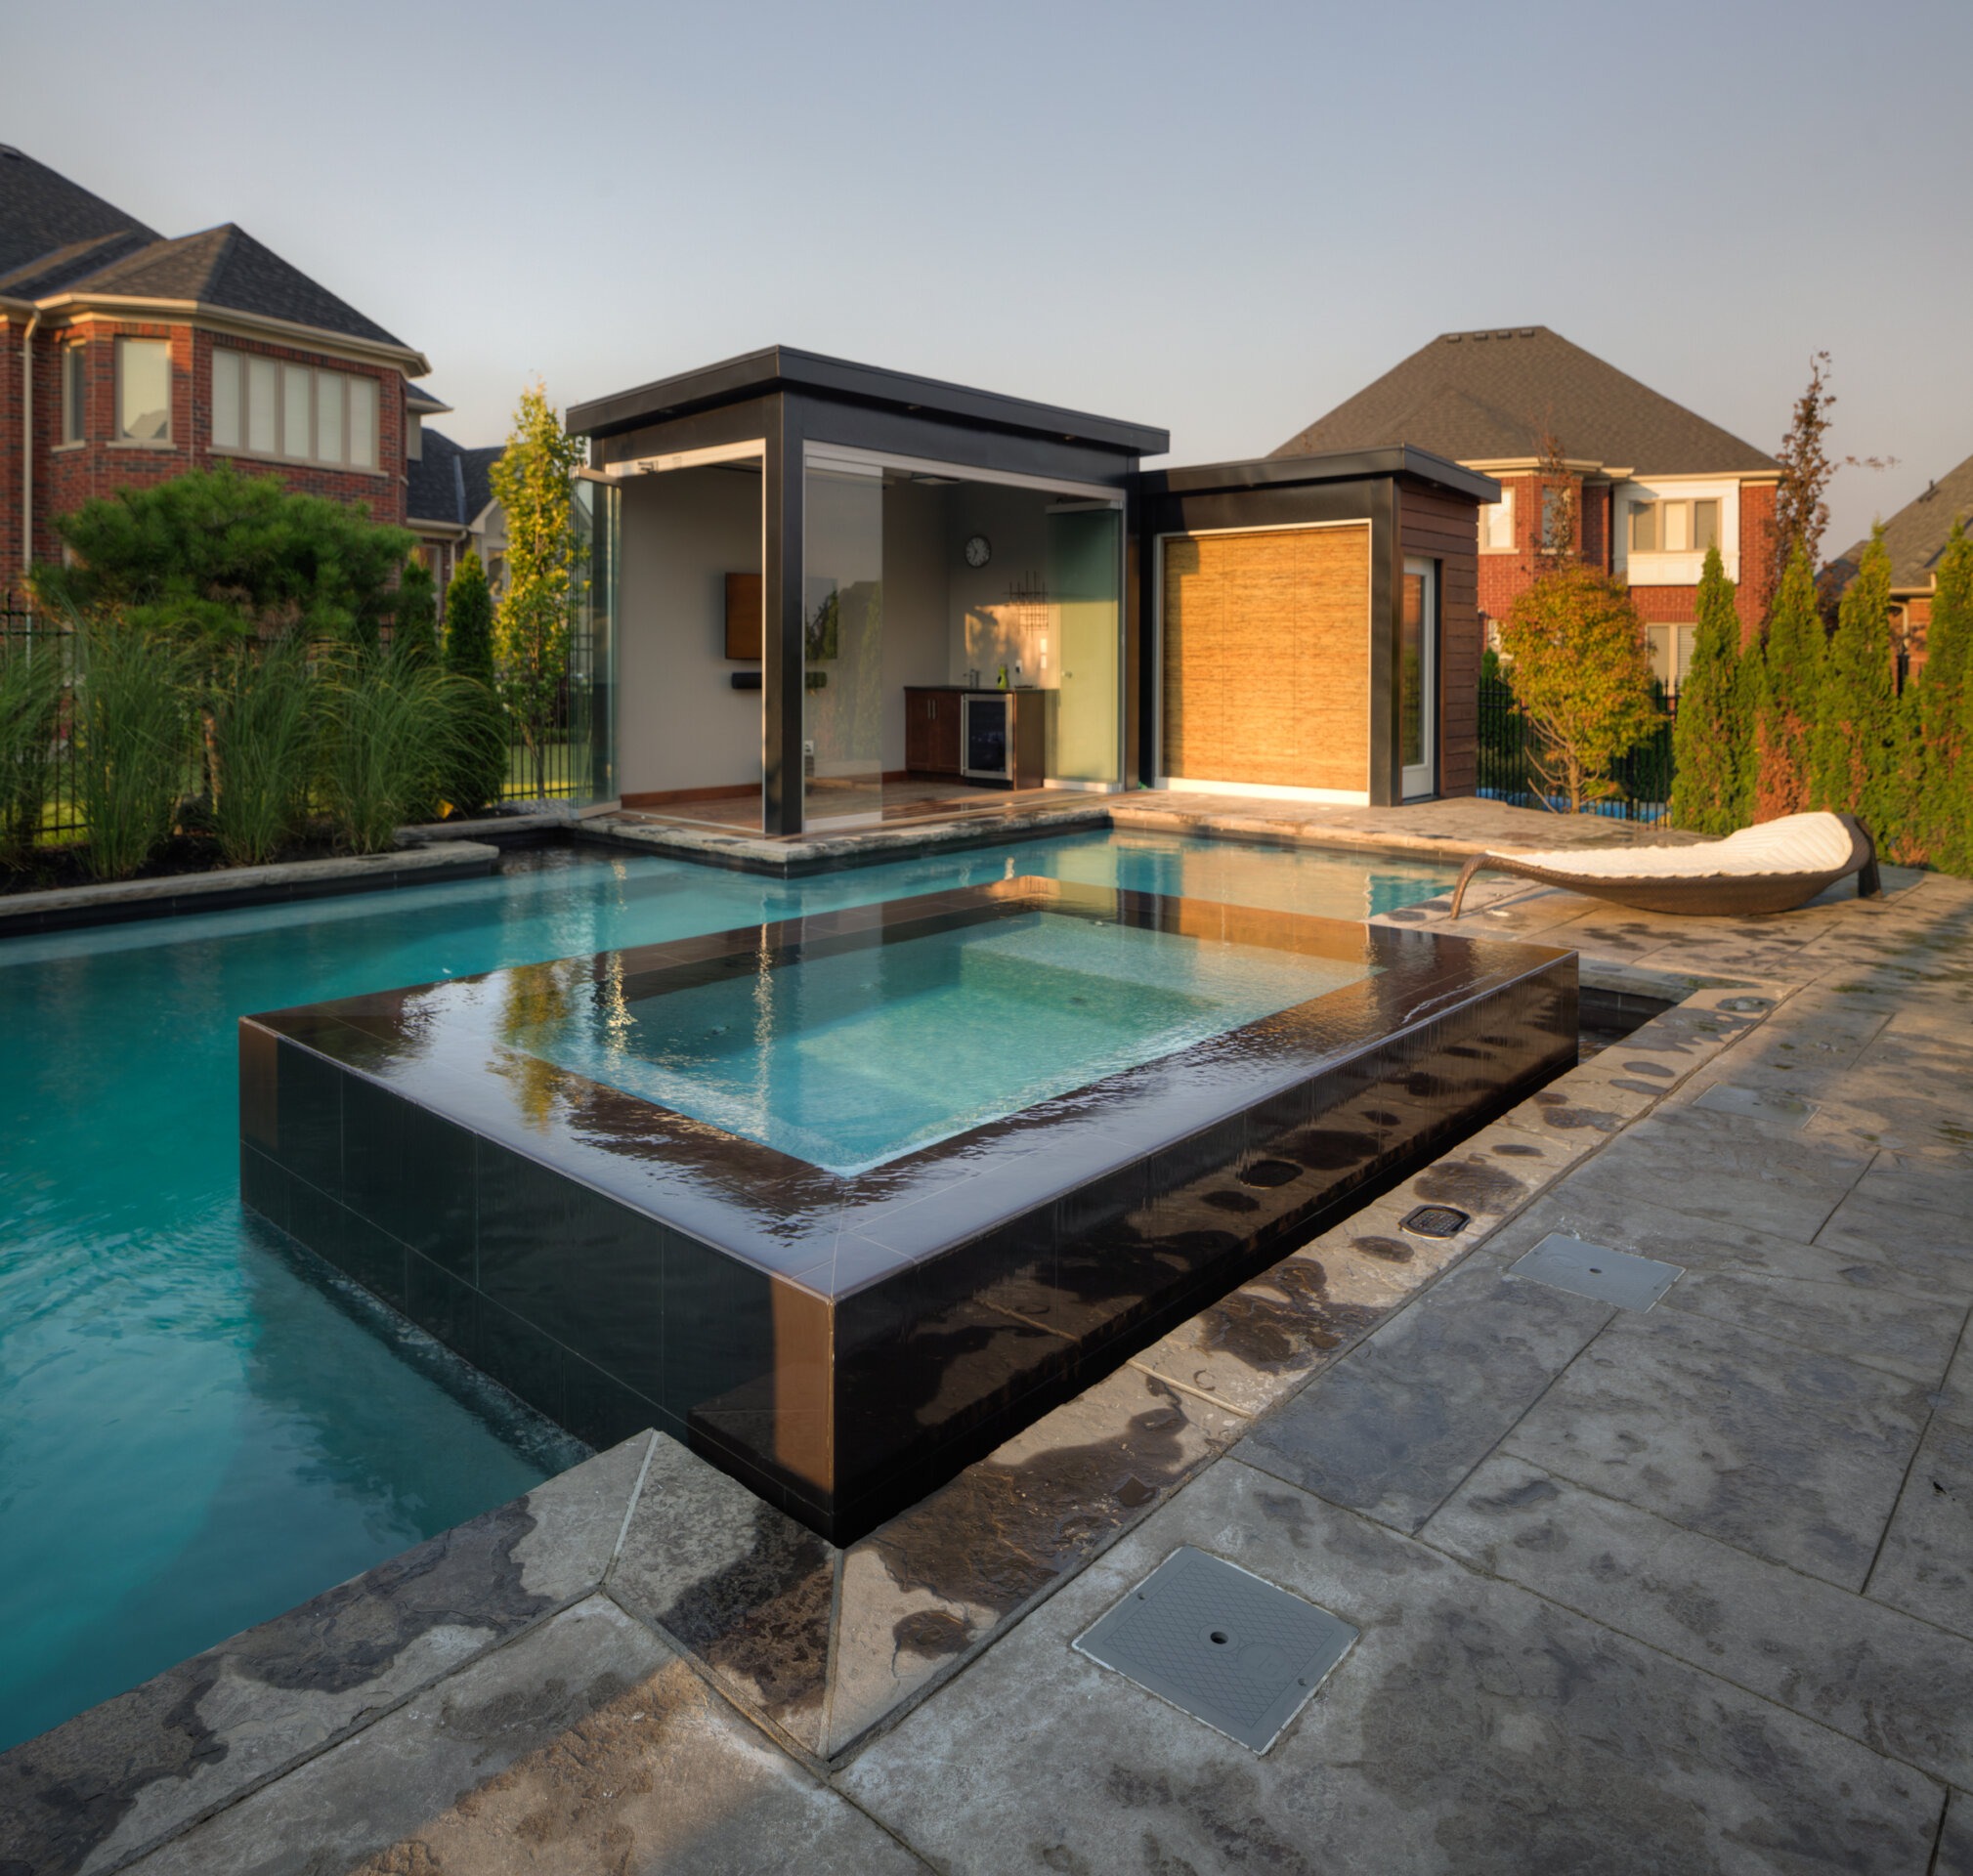 Modern backyard with a luxurious infinity pool and integrated hot tub, surrounded by stone paving, next to a glass-walled pool house at dusk.